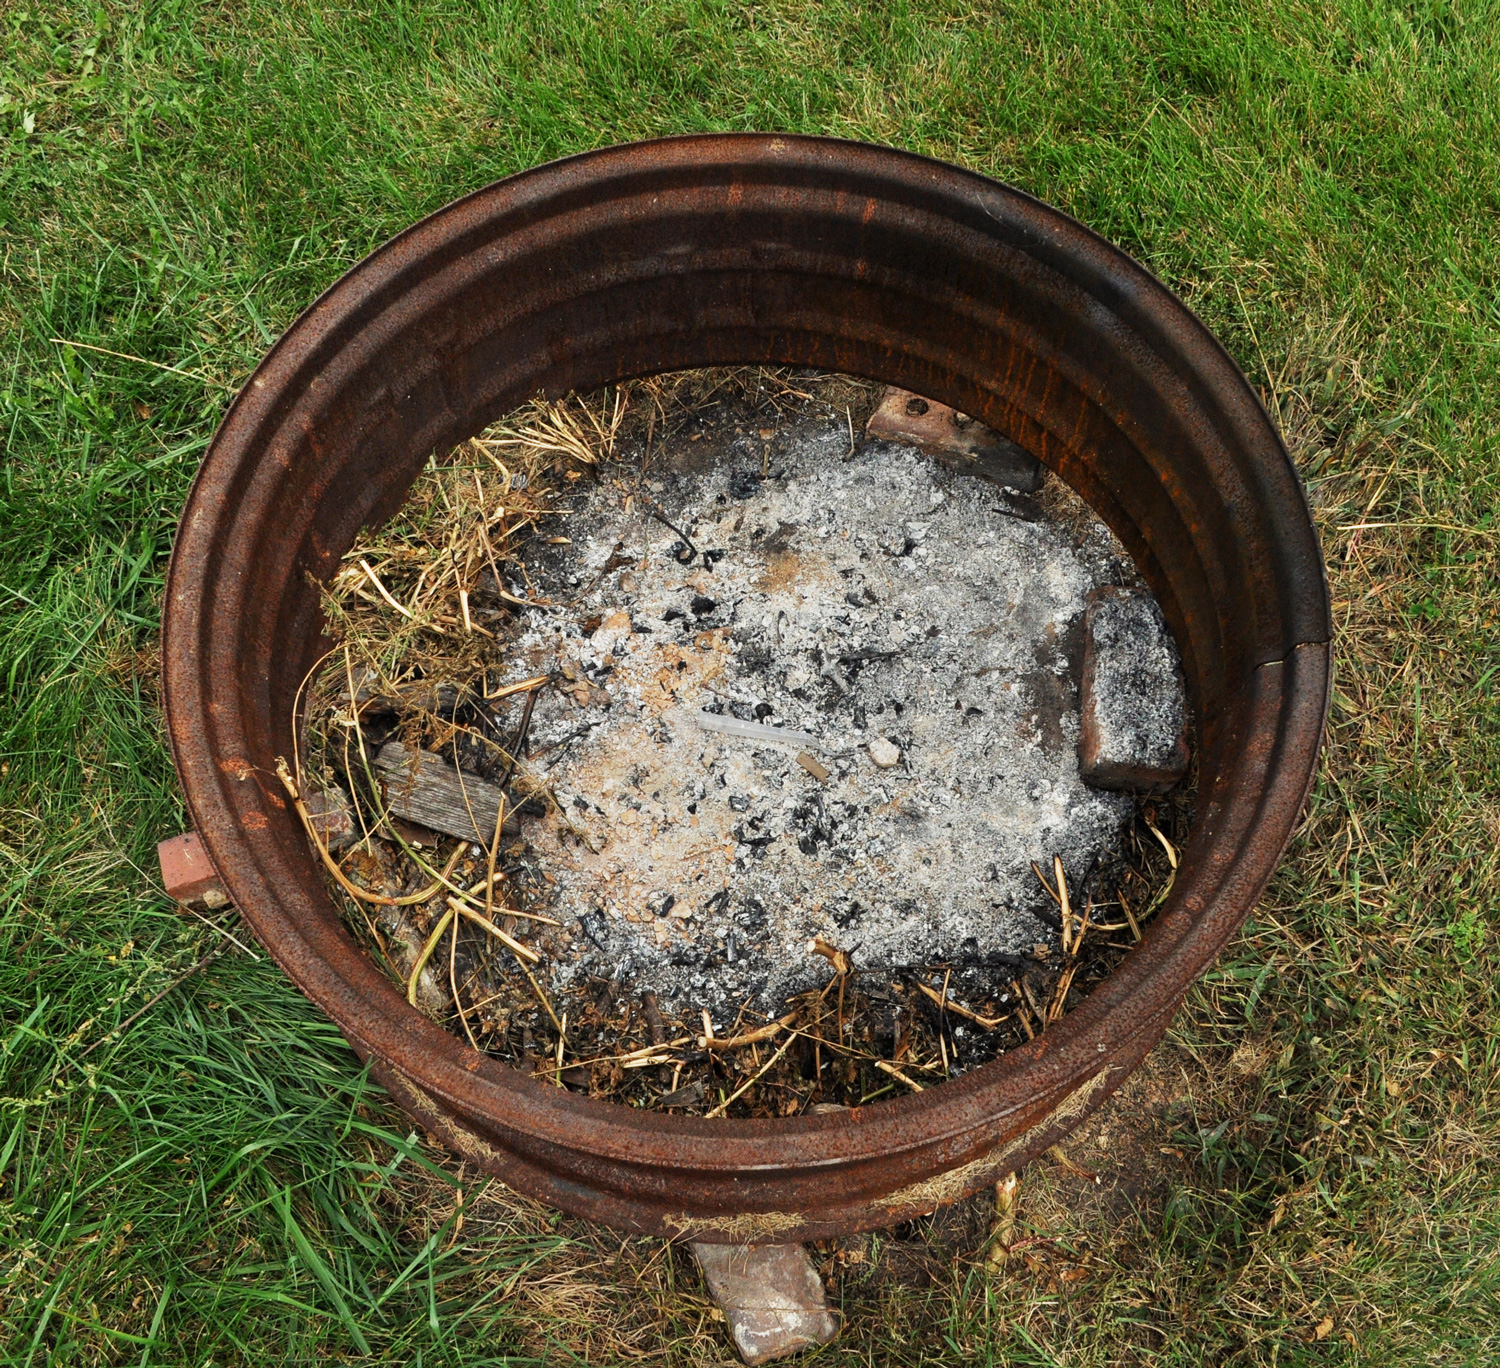 An outdoor fire pit with ashes in it within a metal hub.